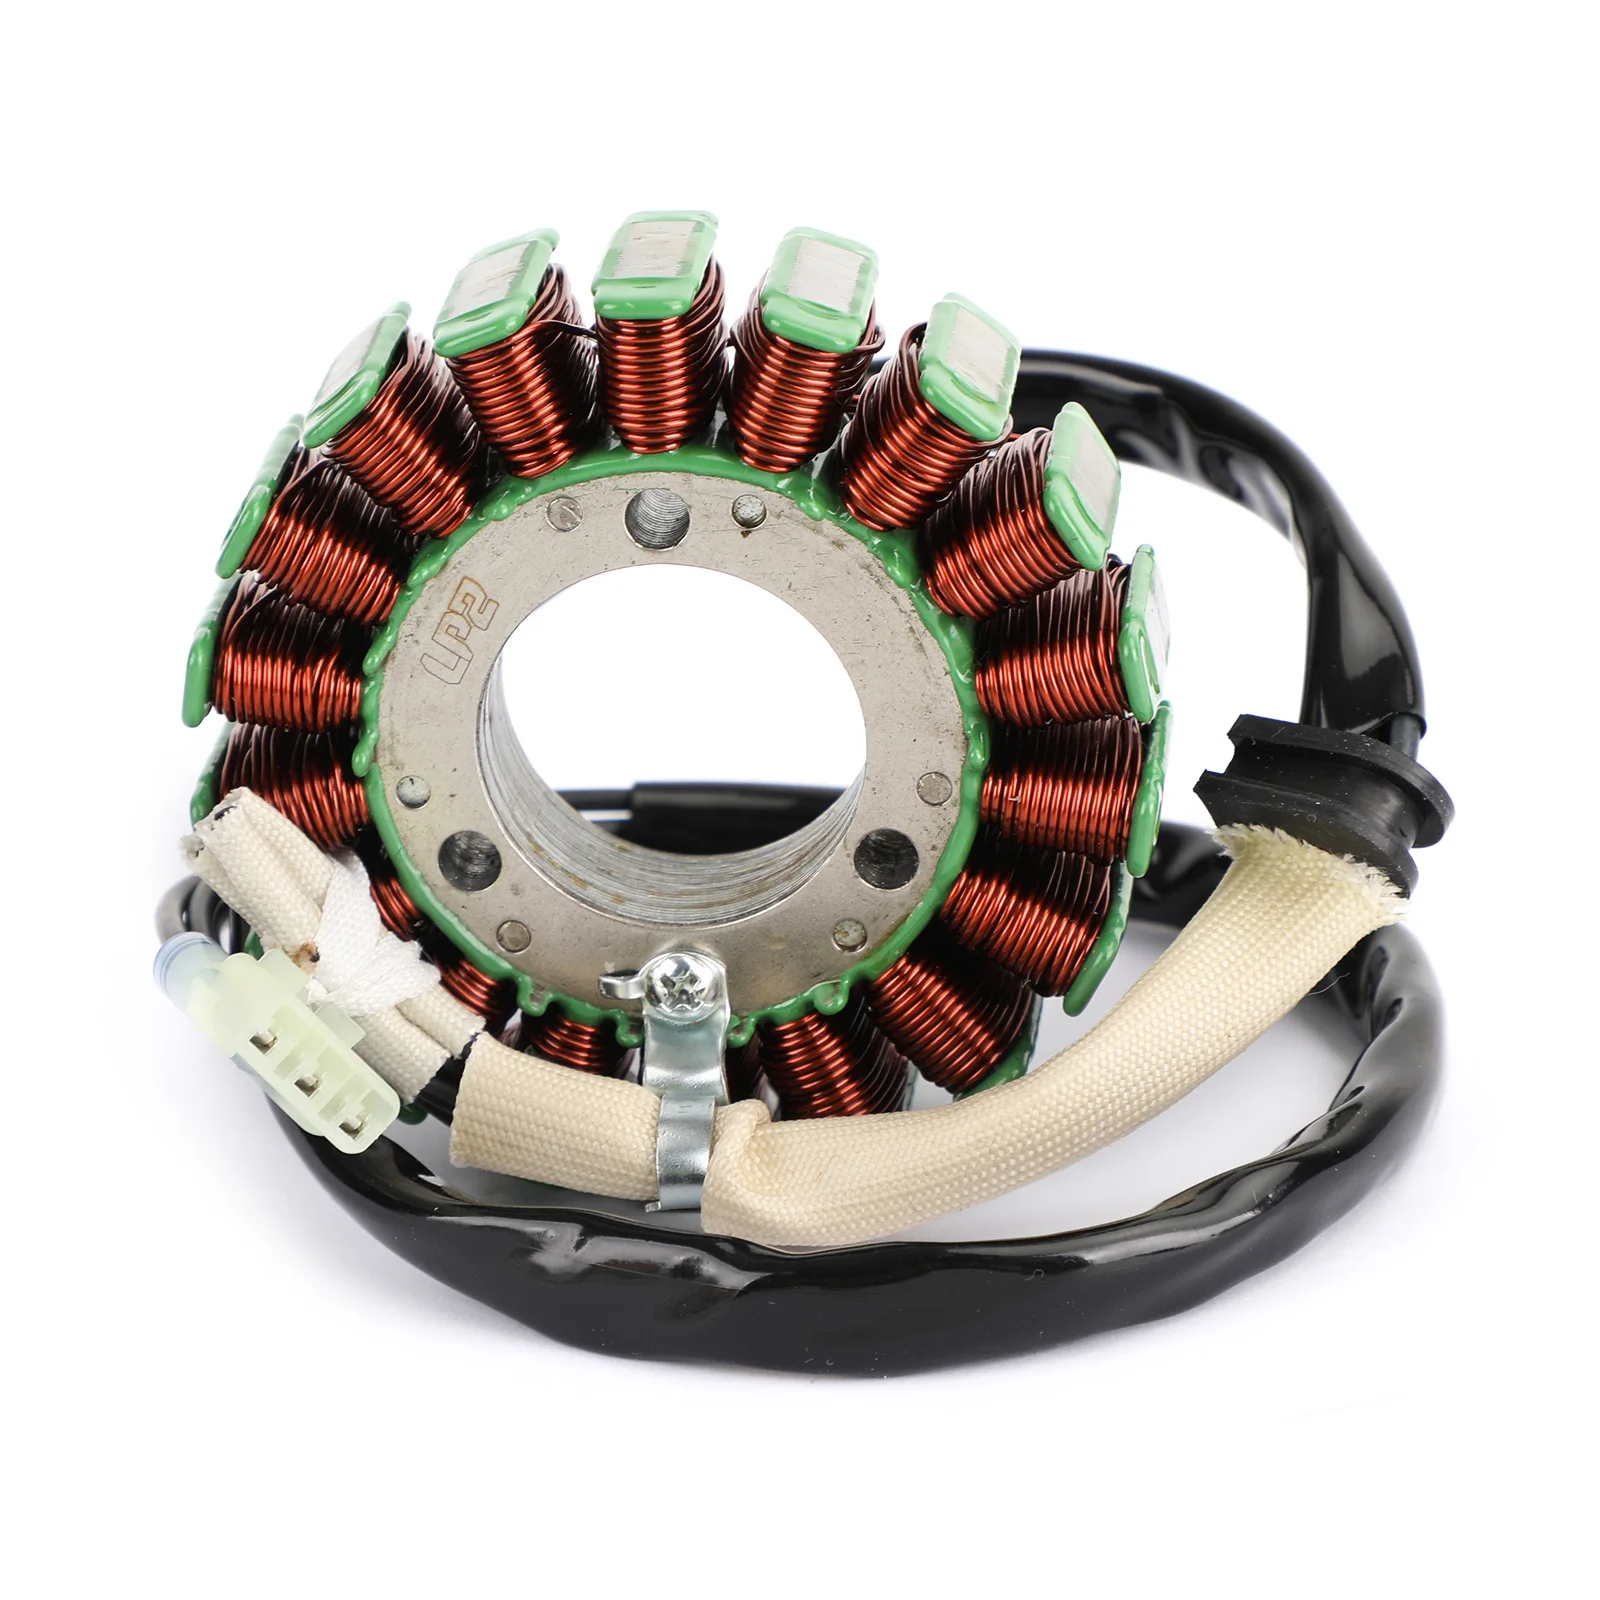 

Areyourshop 006101200000 Magneto Generator Engine Stator Coil For Beta RR 4T 350 390 430 480 Racing 2015-2019